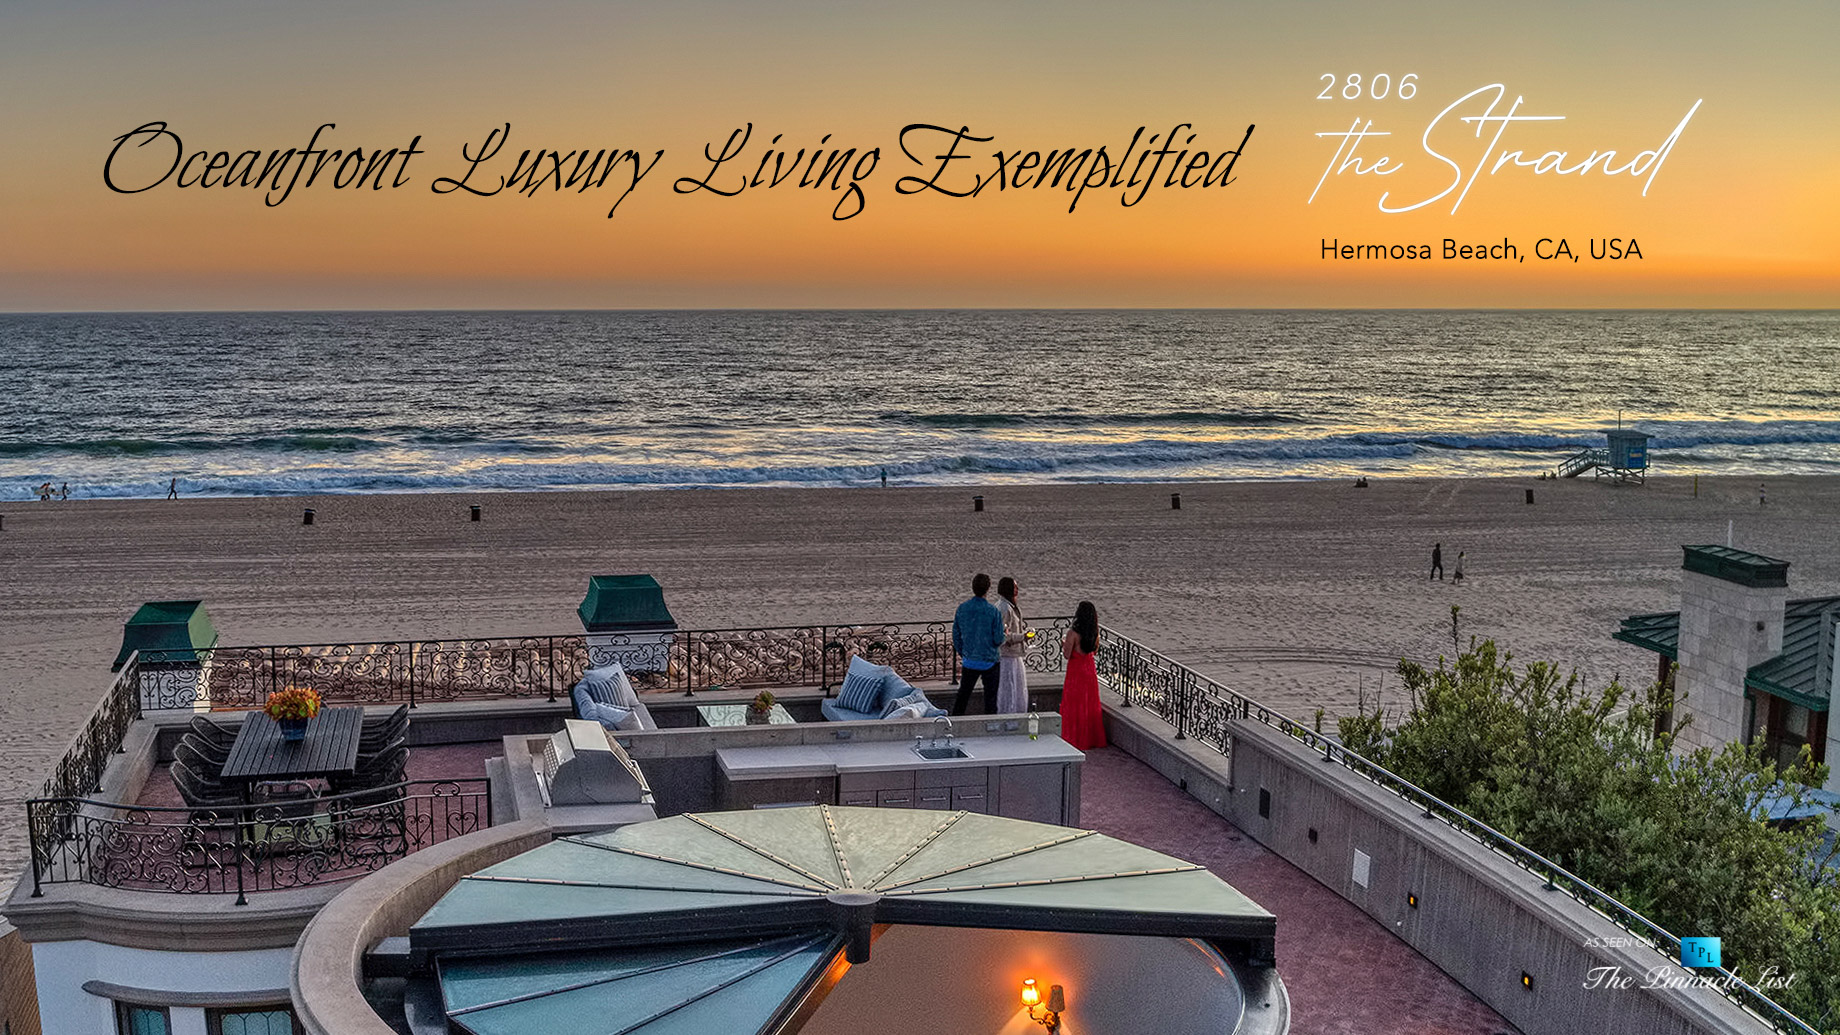 Oceanfront Luxury Living Exemplified - 2806 The Strand, Hermosa Beach, CA, USA